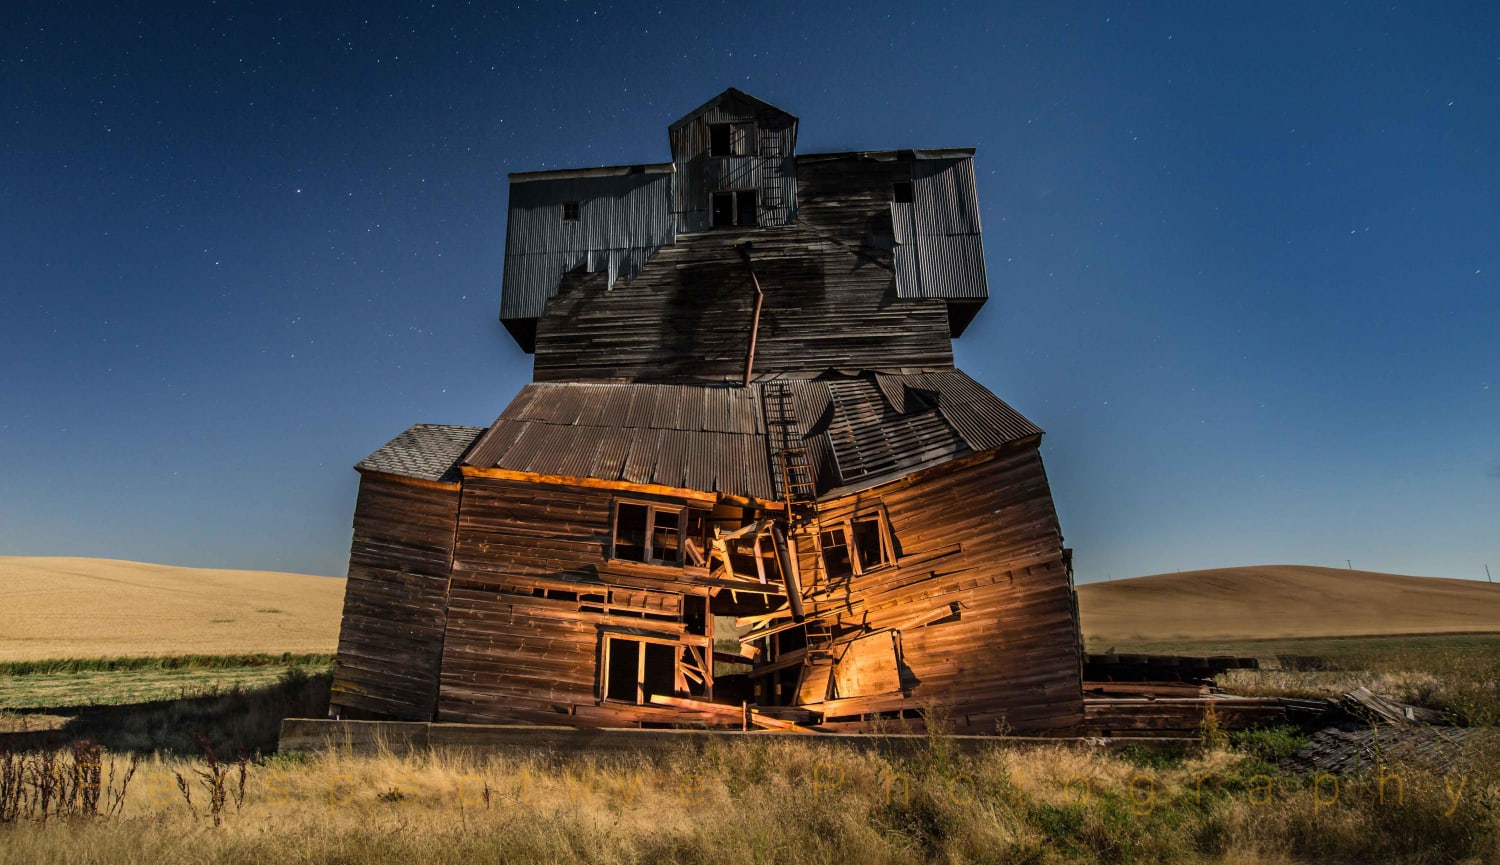 Entropies Darling. The Palouse in Idaho U.S.. Long exposure with Light painting.